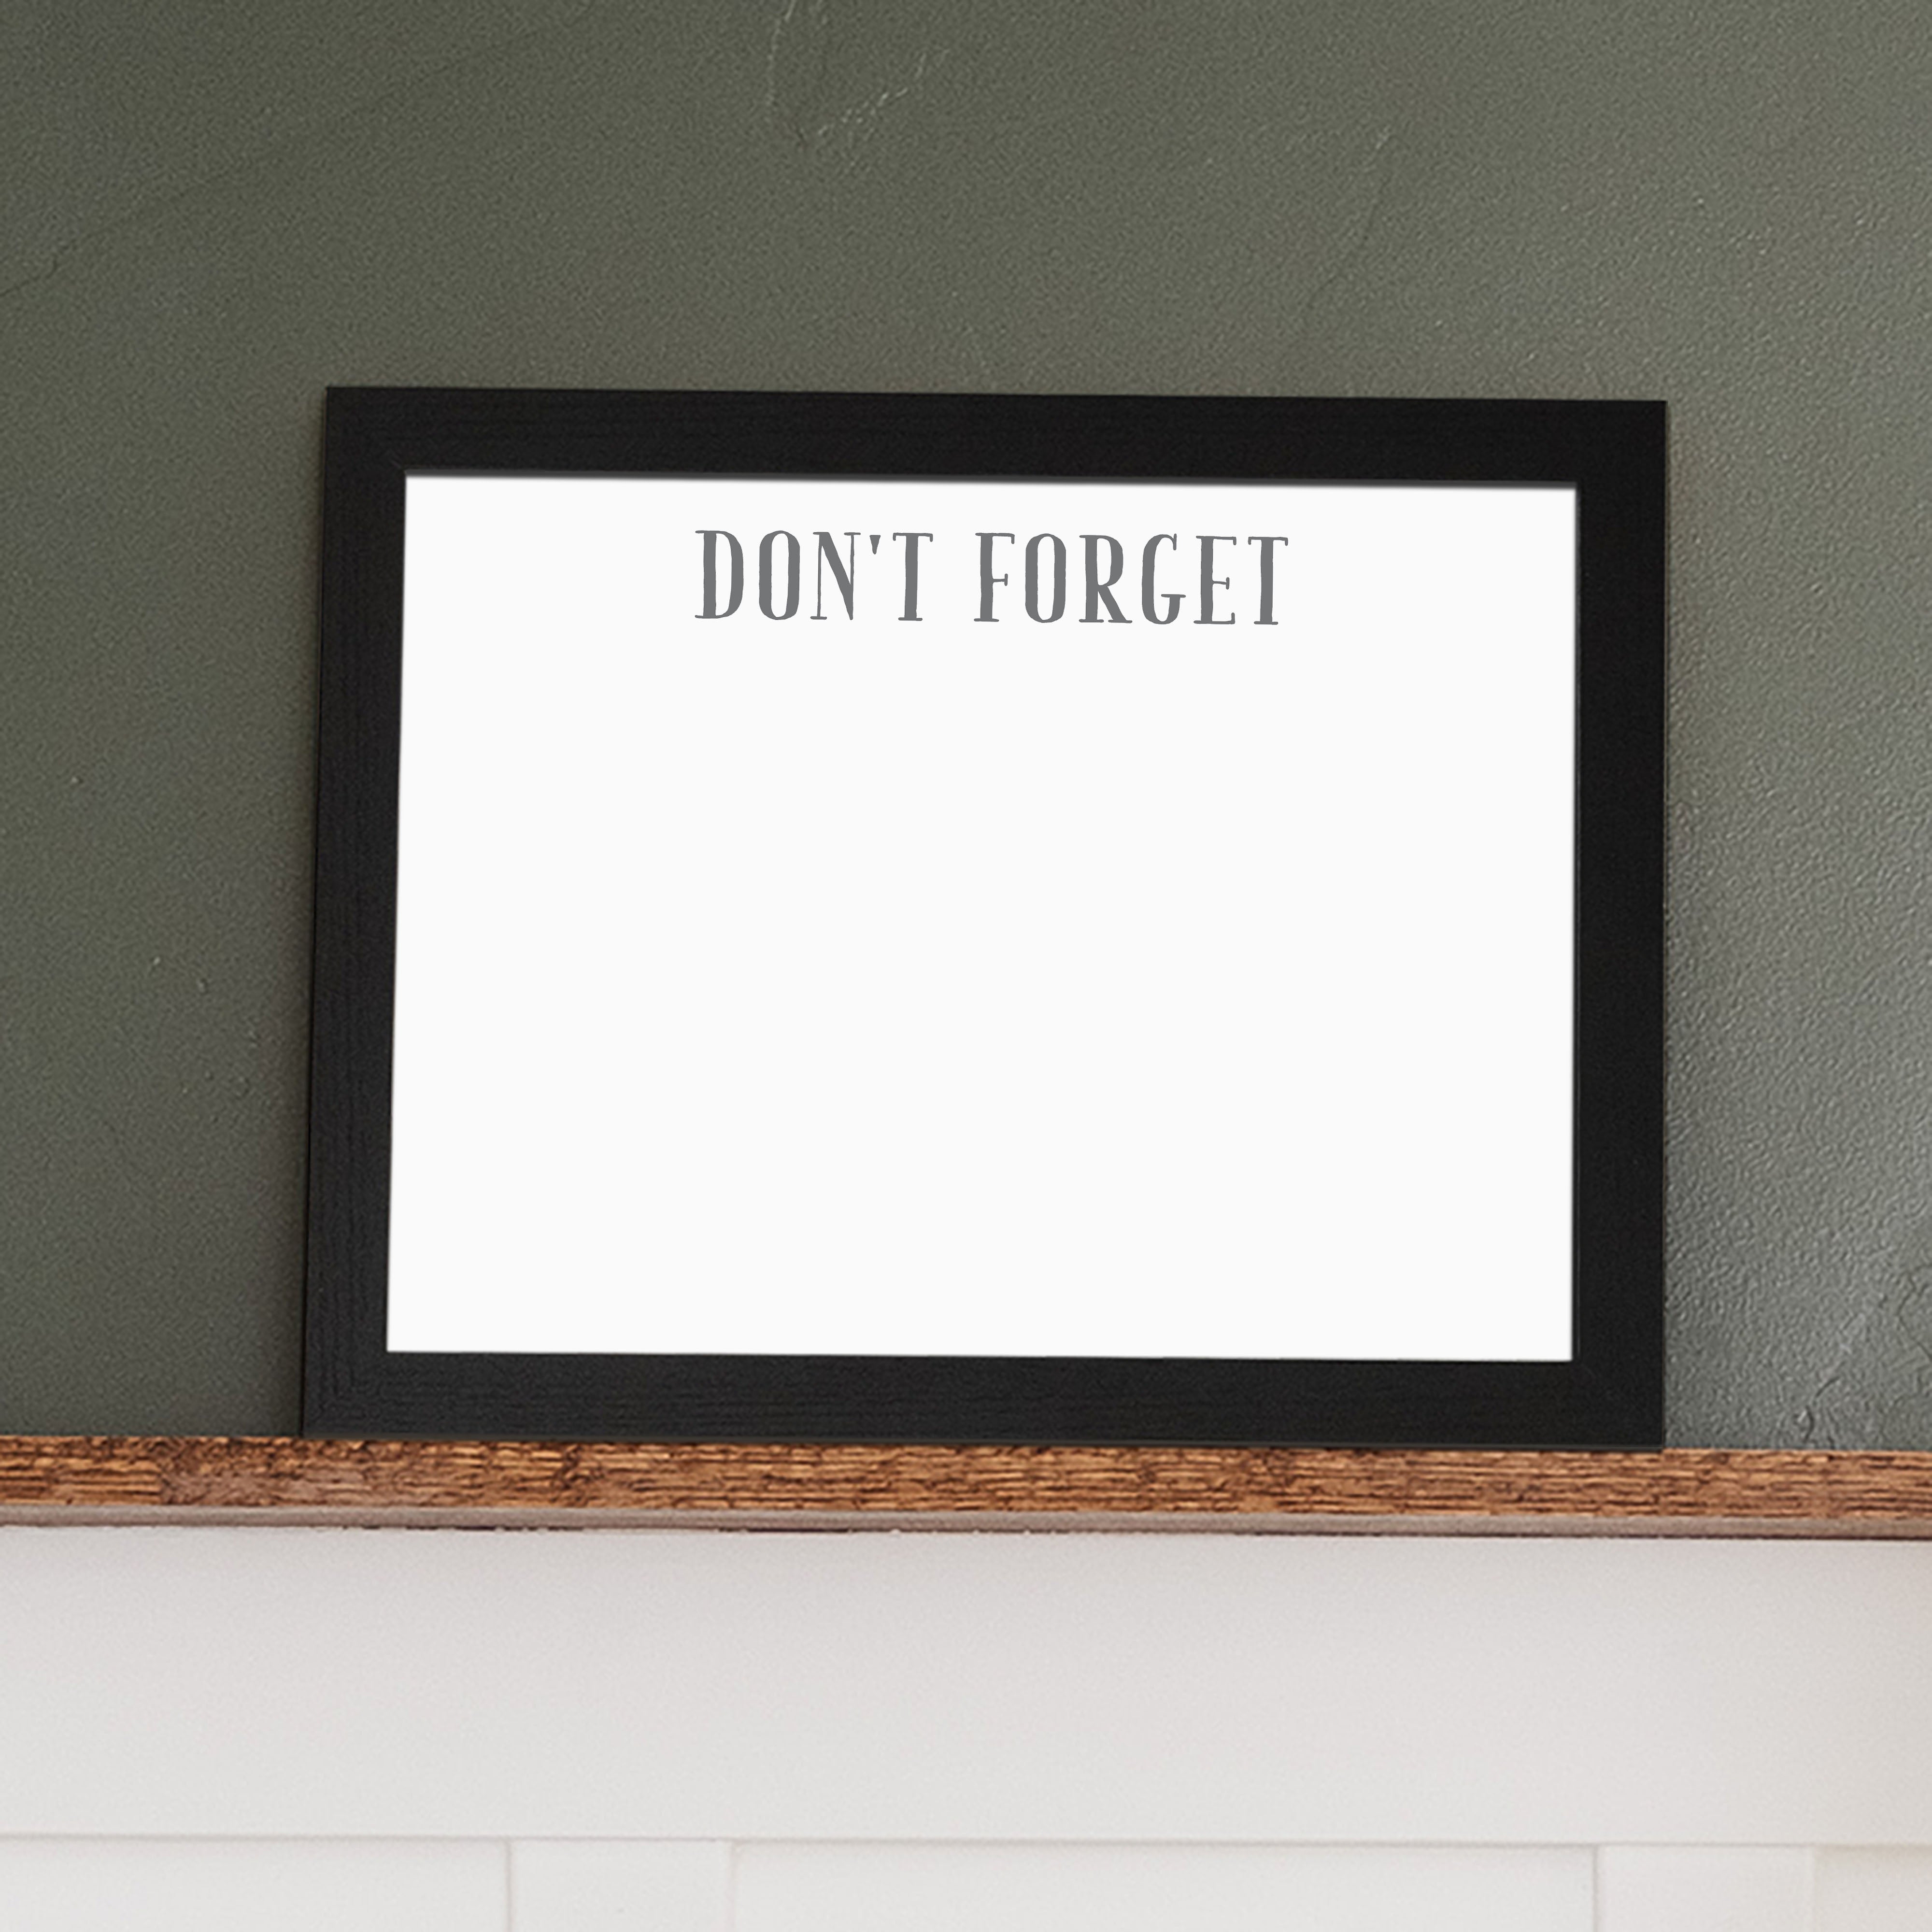 A framed whiteboard calendar with a two month design format hanging on the wall